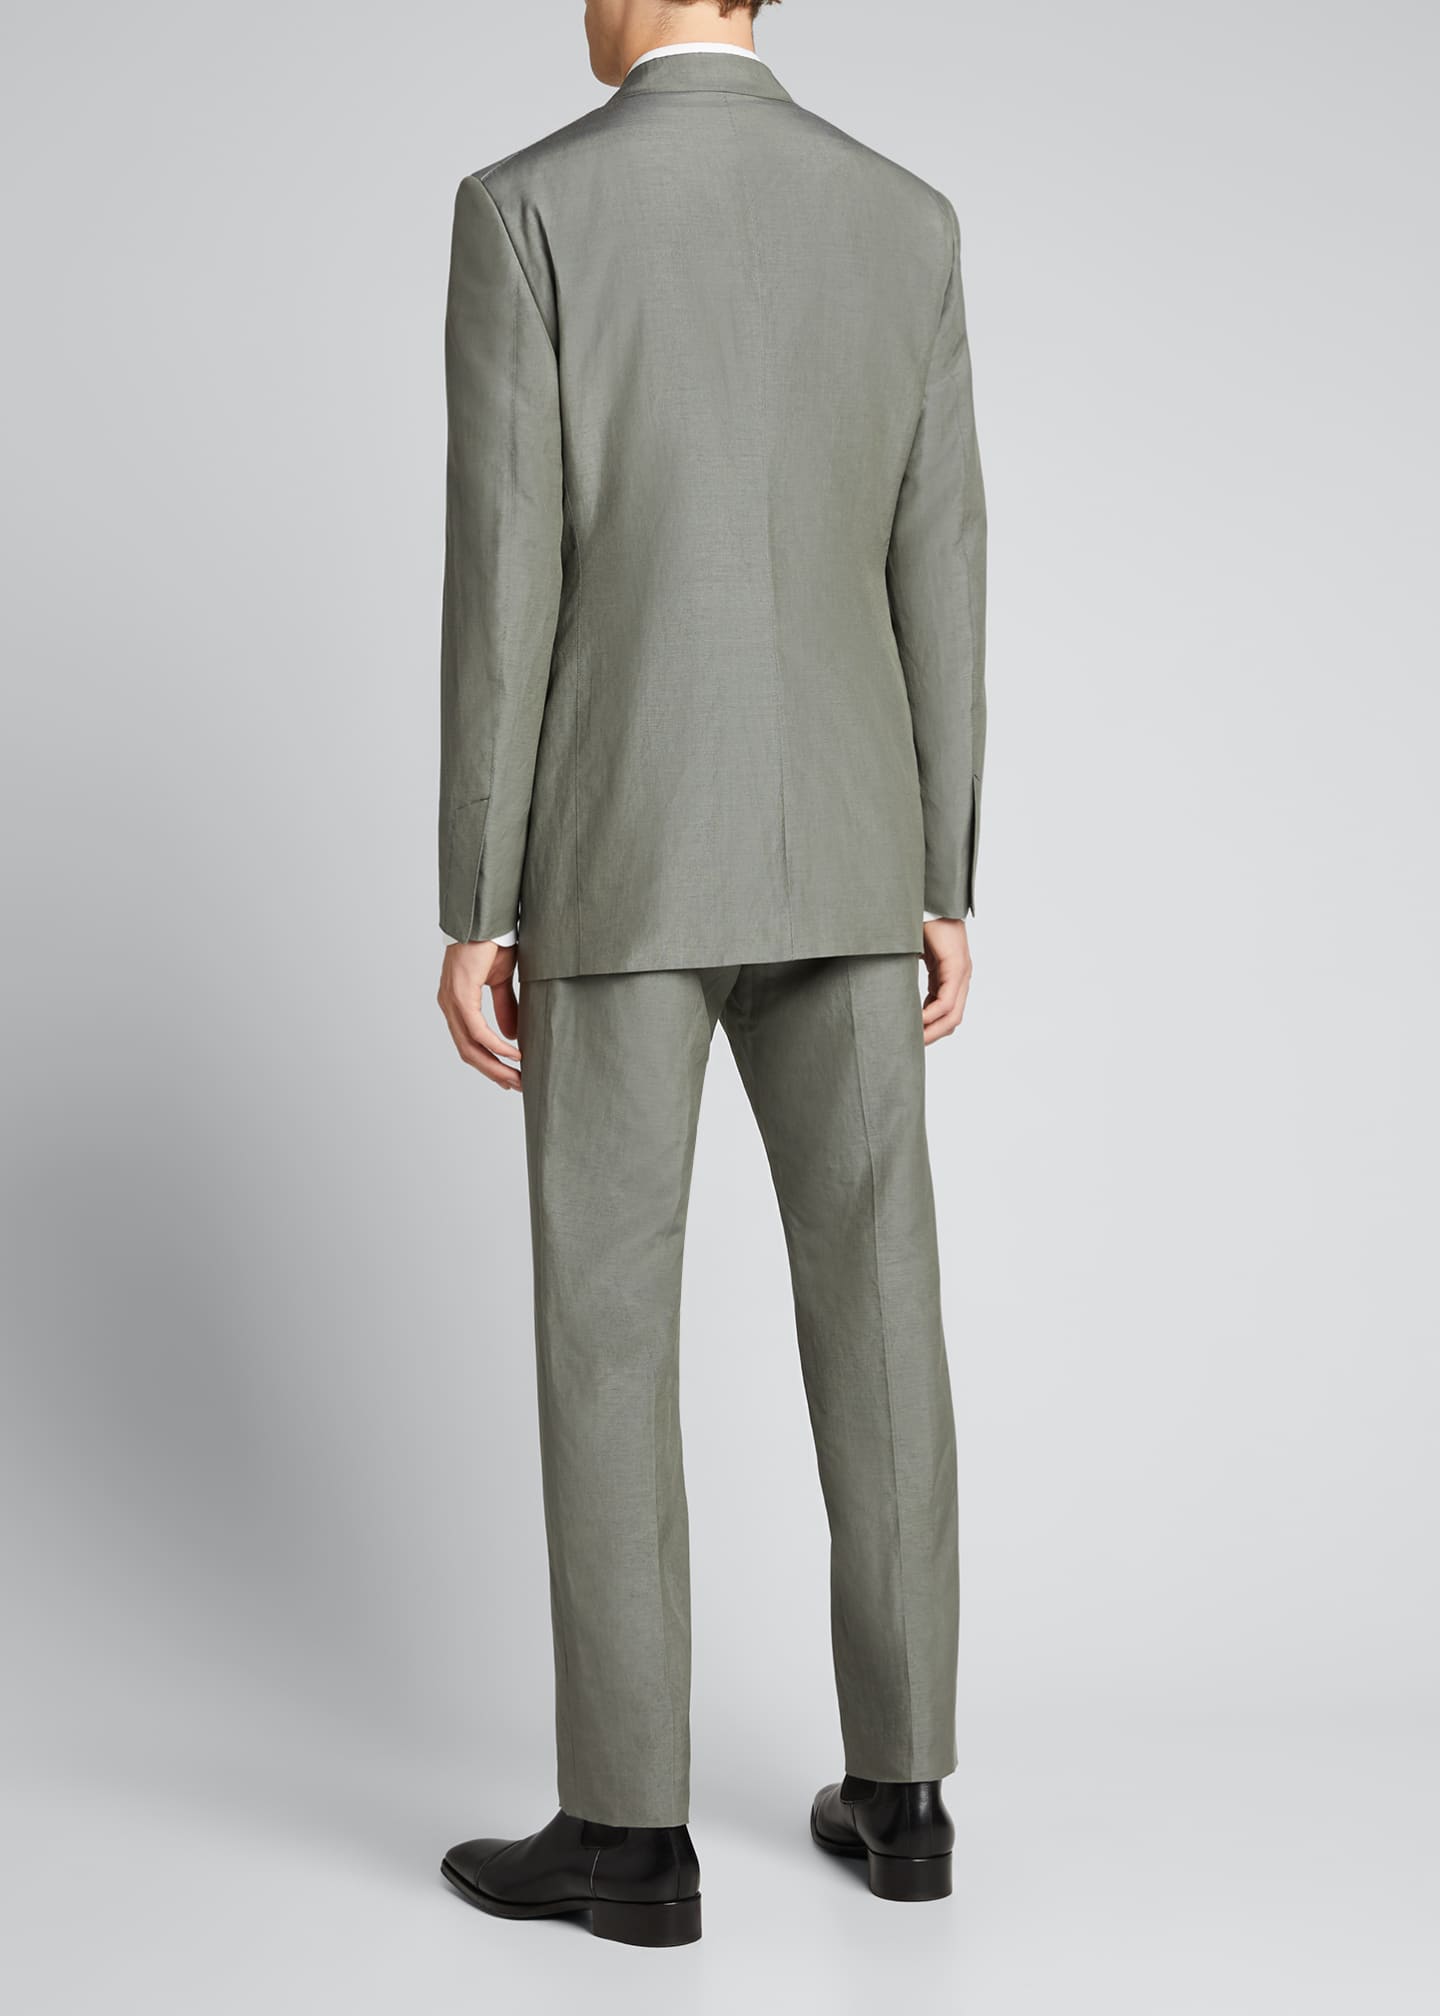 TOM FORD Men's Silk-Linen Two-Piece Day Suit, Gray - Bergdorf Goodman